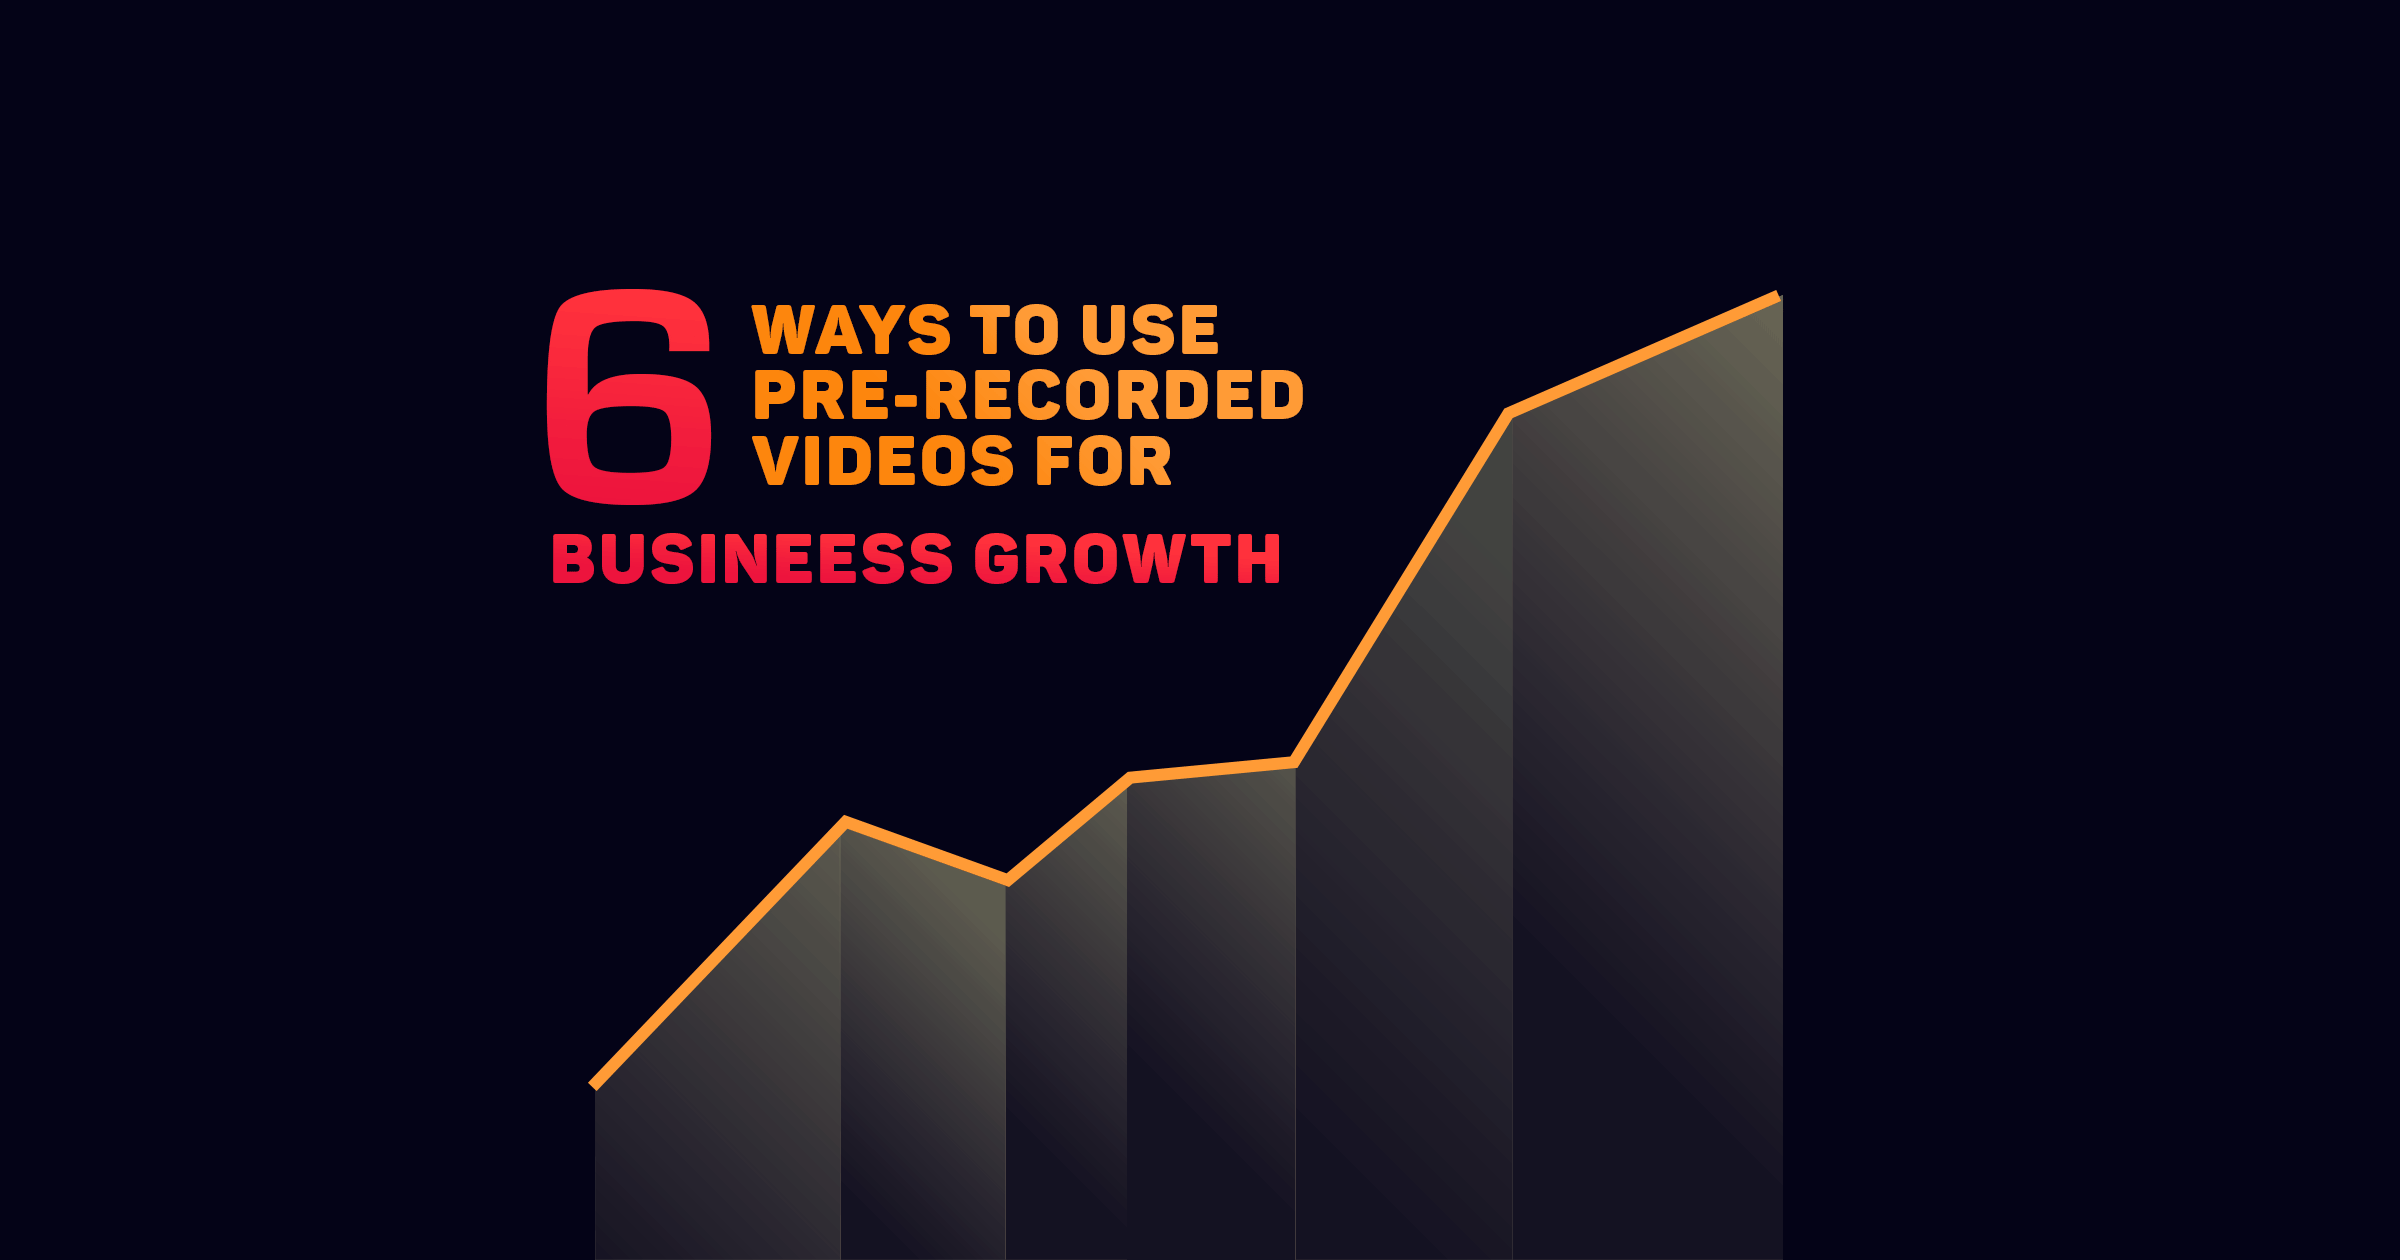 Using pre-recorded live videos for business growth